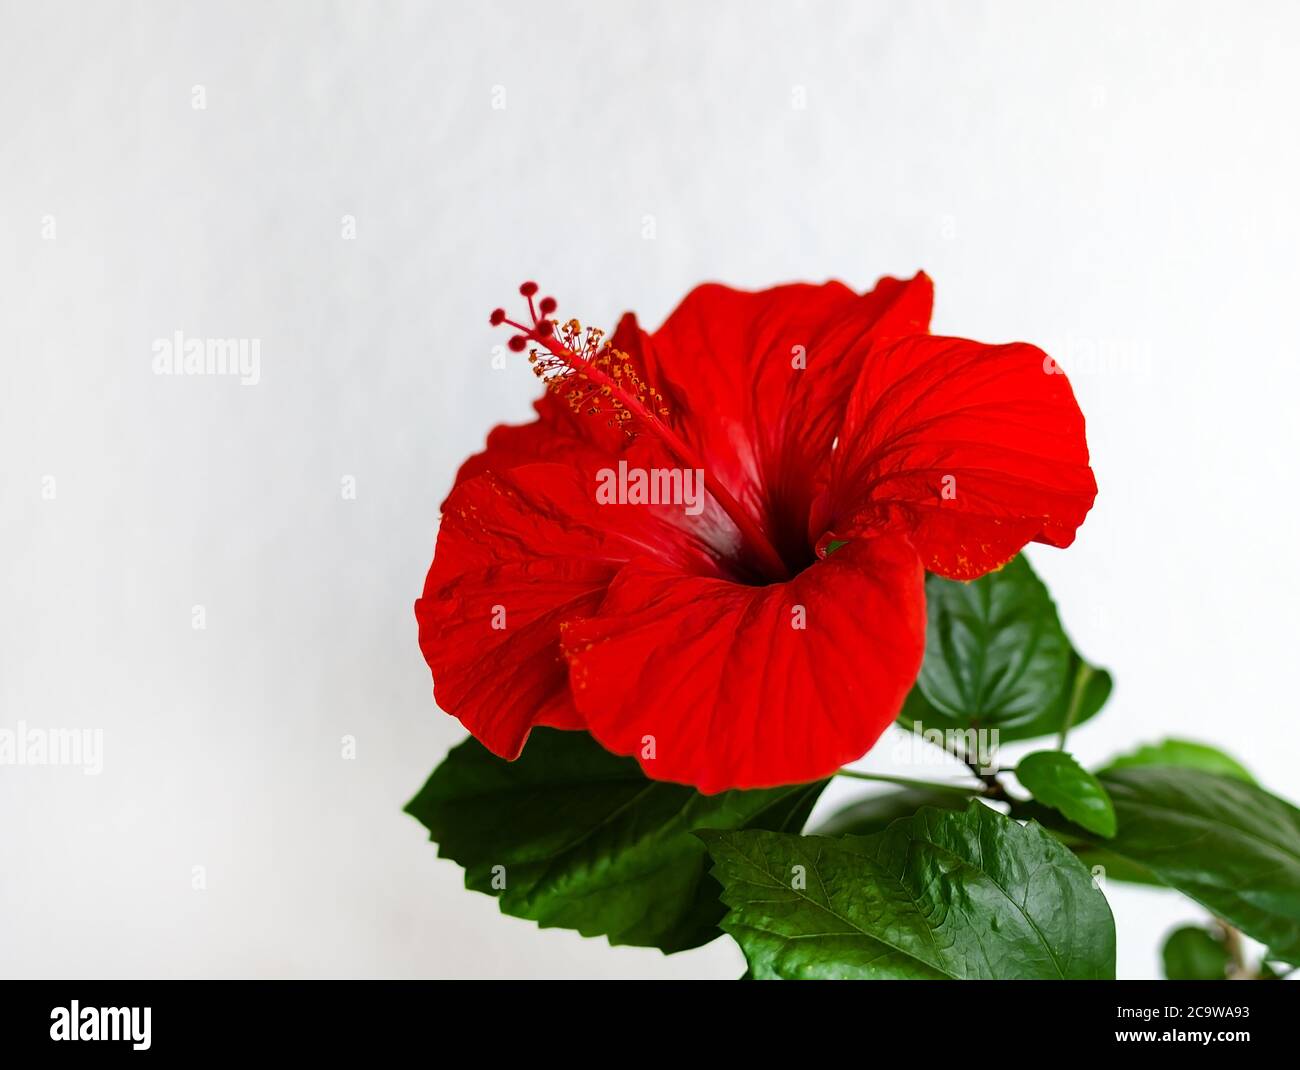 hibiscus, flower with stamens and pistil on a light background with green leaves Stock Photo